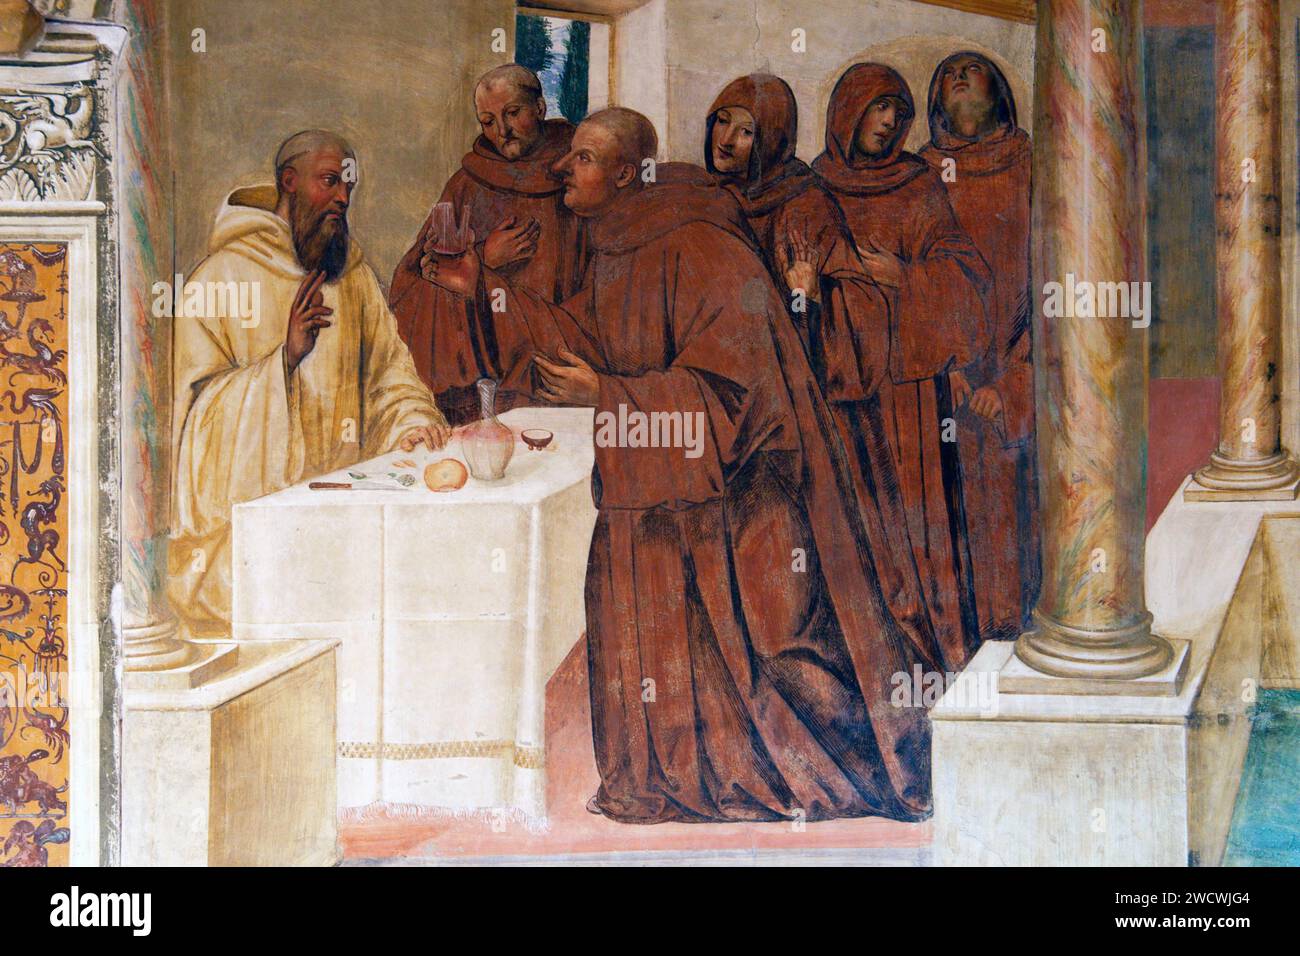 Italy, Tuscany, Siena countryside, Crete Senesi, town of Asciano, Chiusure, Monte Oliveto Maggiore Benedictine Abbey (Abbazia di Monte Oliveto Maggiore), the cloister, San Benedetto life fresco by Signorelli and Sodoma, like Benedict breaks a glass of poisoned wine with the sign of the cross Stock Photo